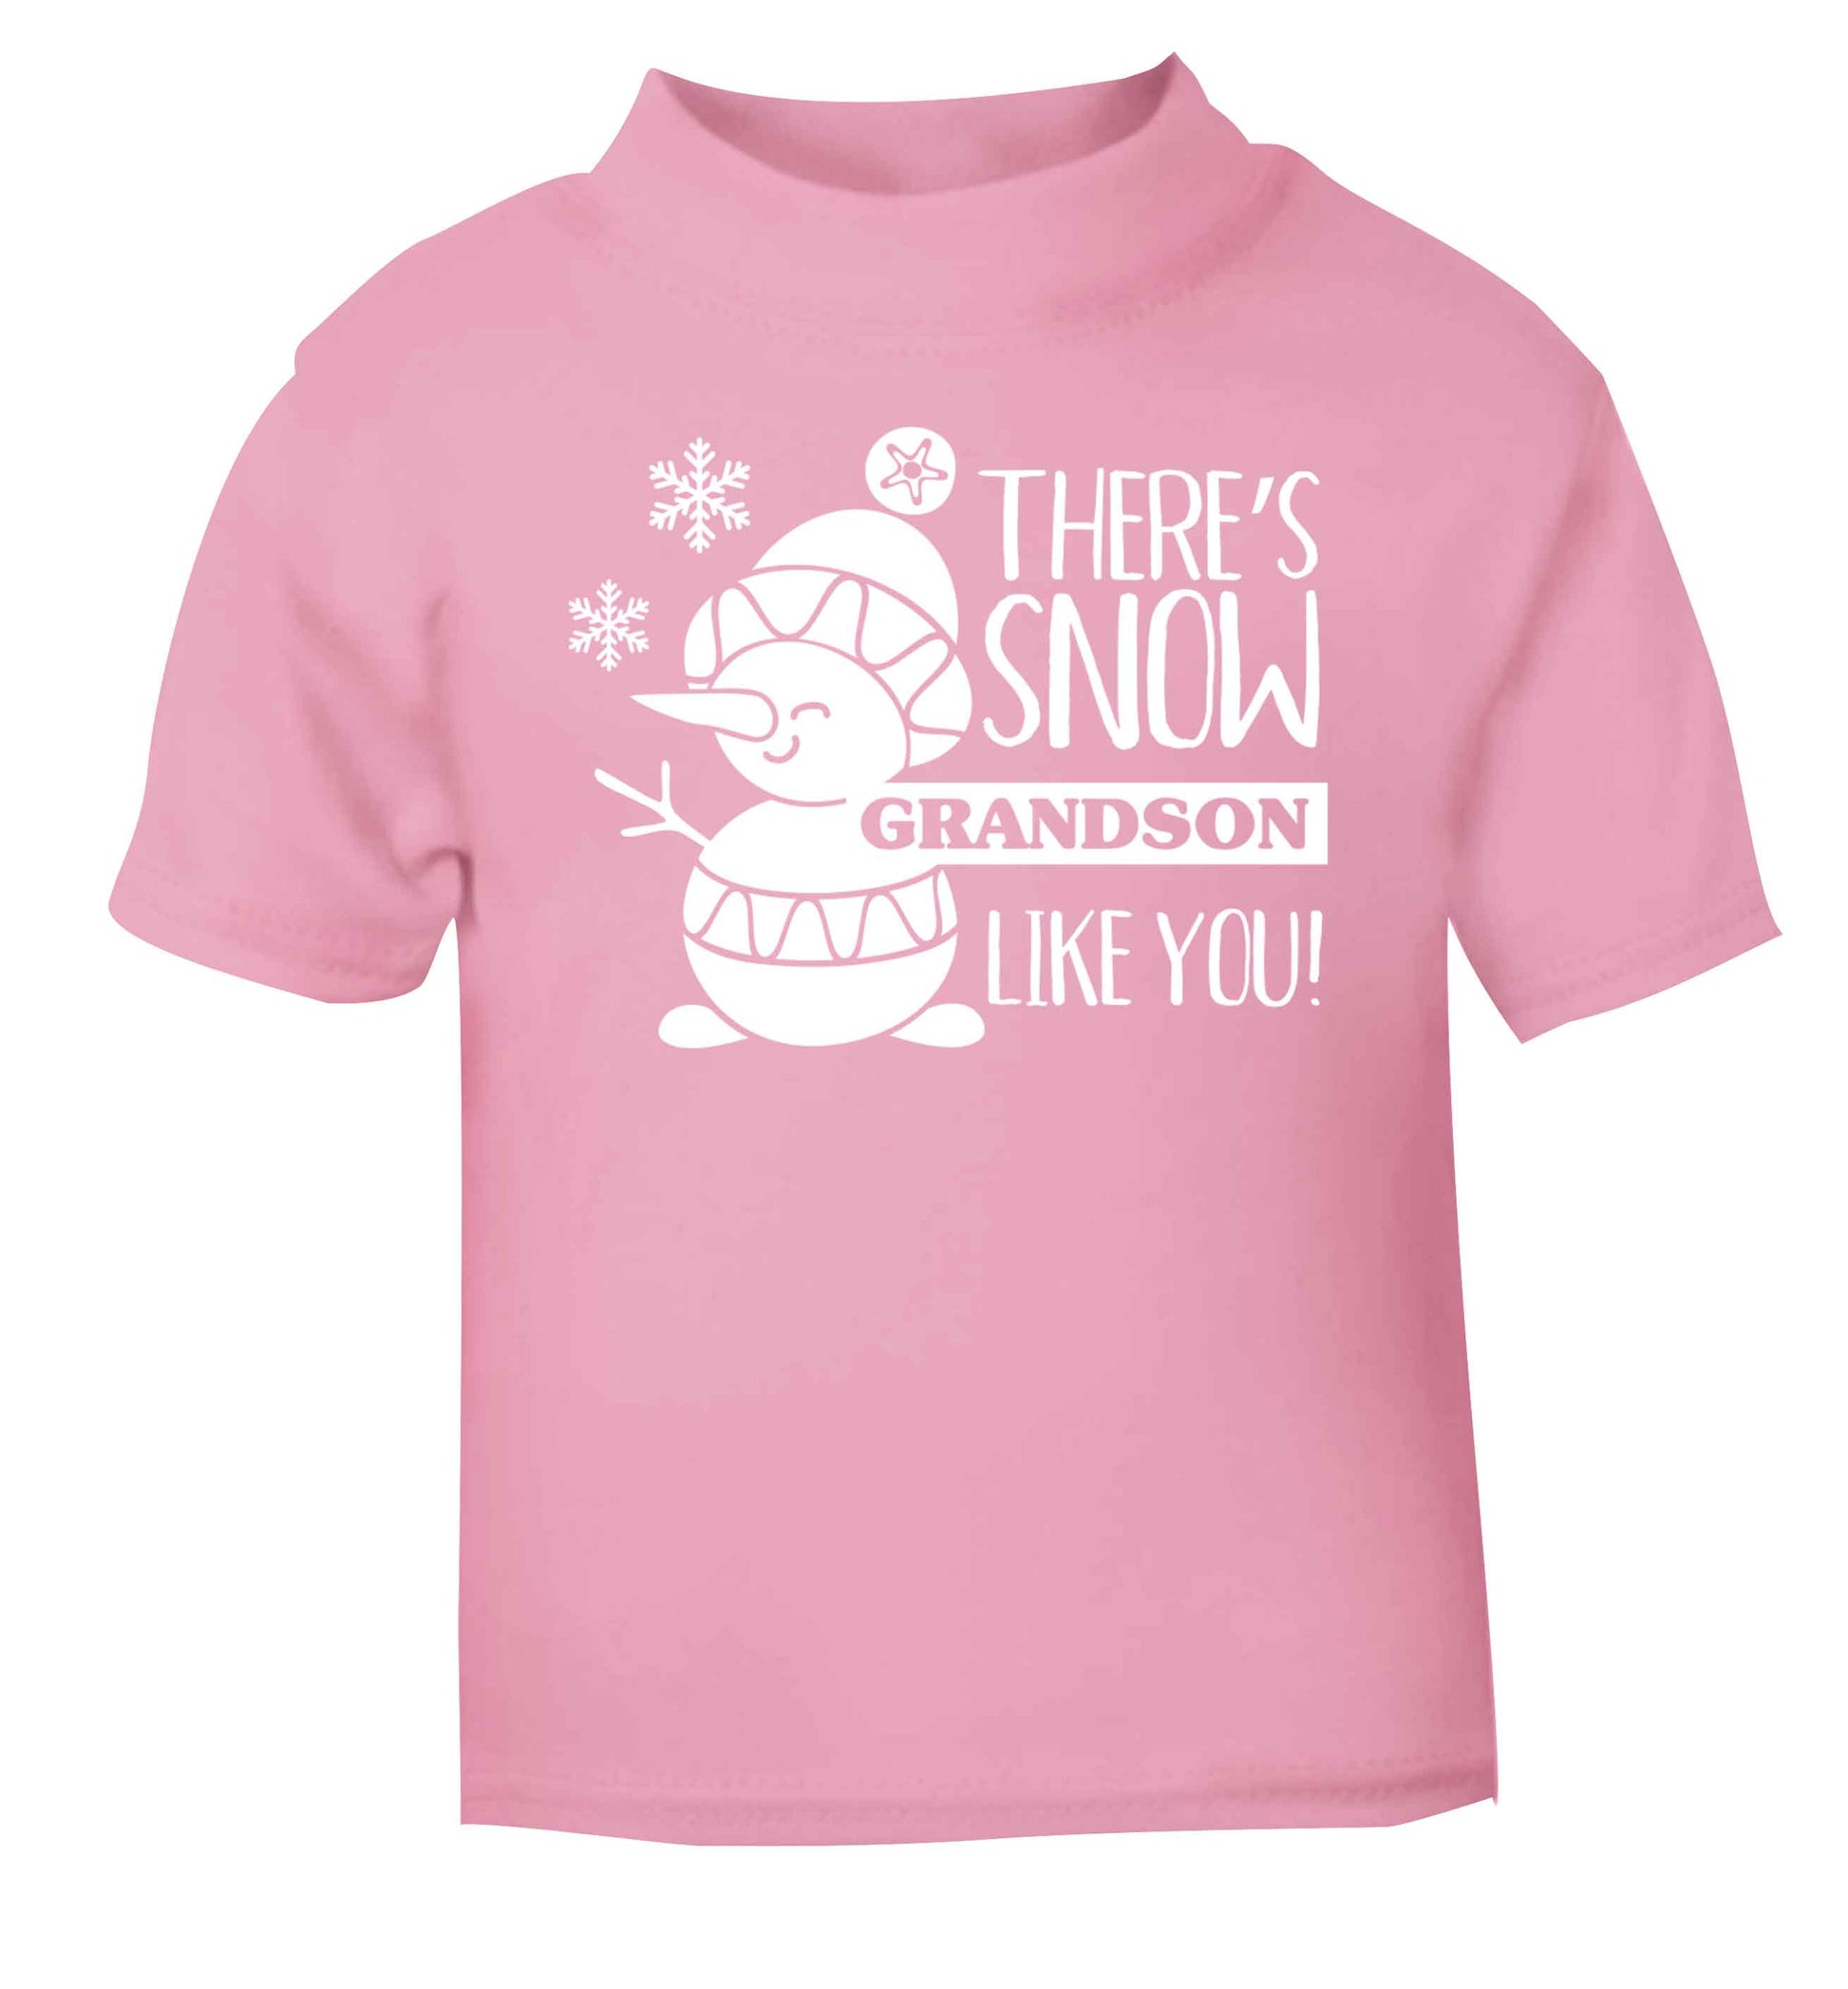 There's snow grandson like you light pink baby toddler Tshirt 2 Years